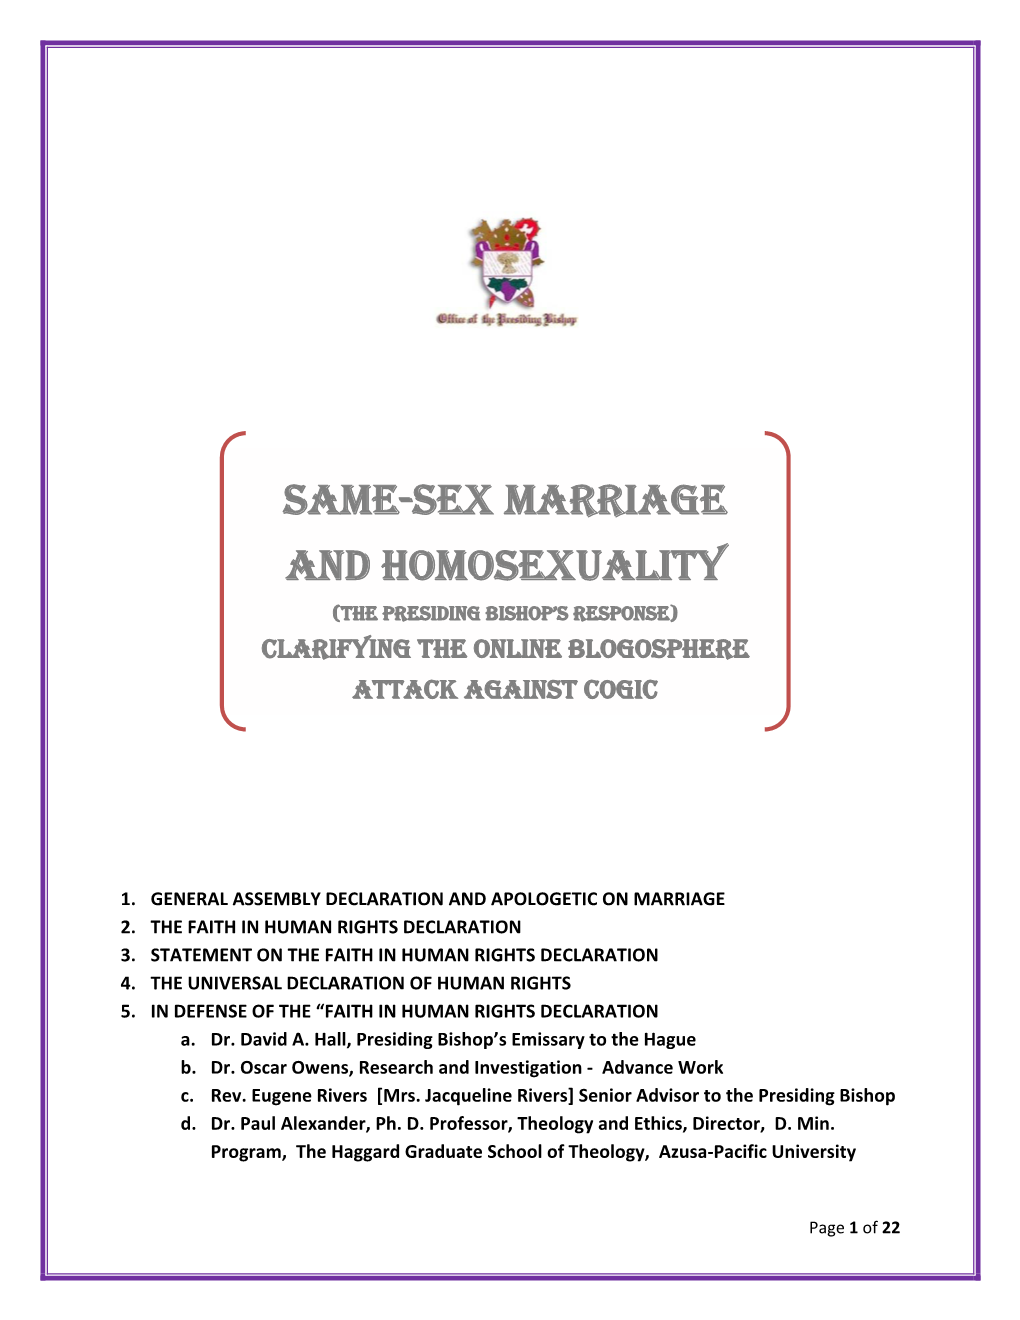 Same-Sex Marriage and Homosexuality